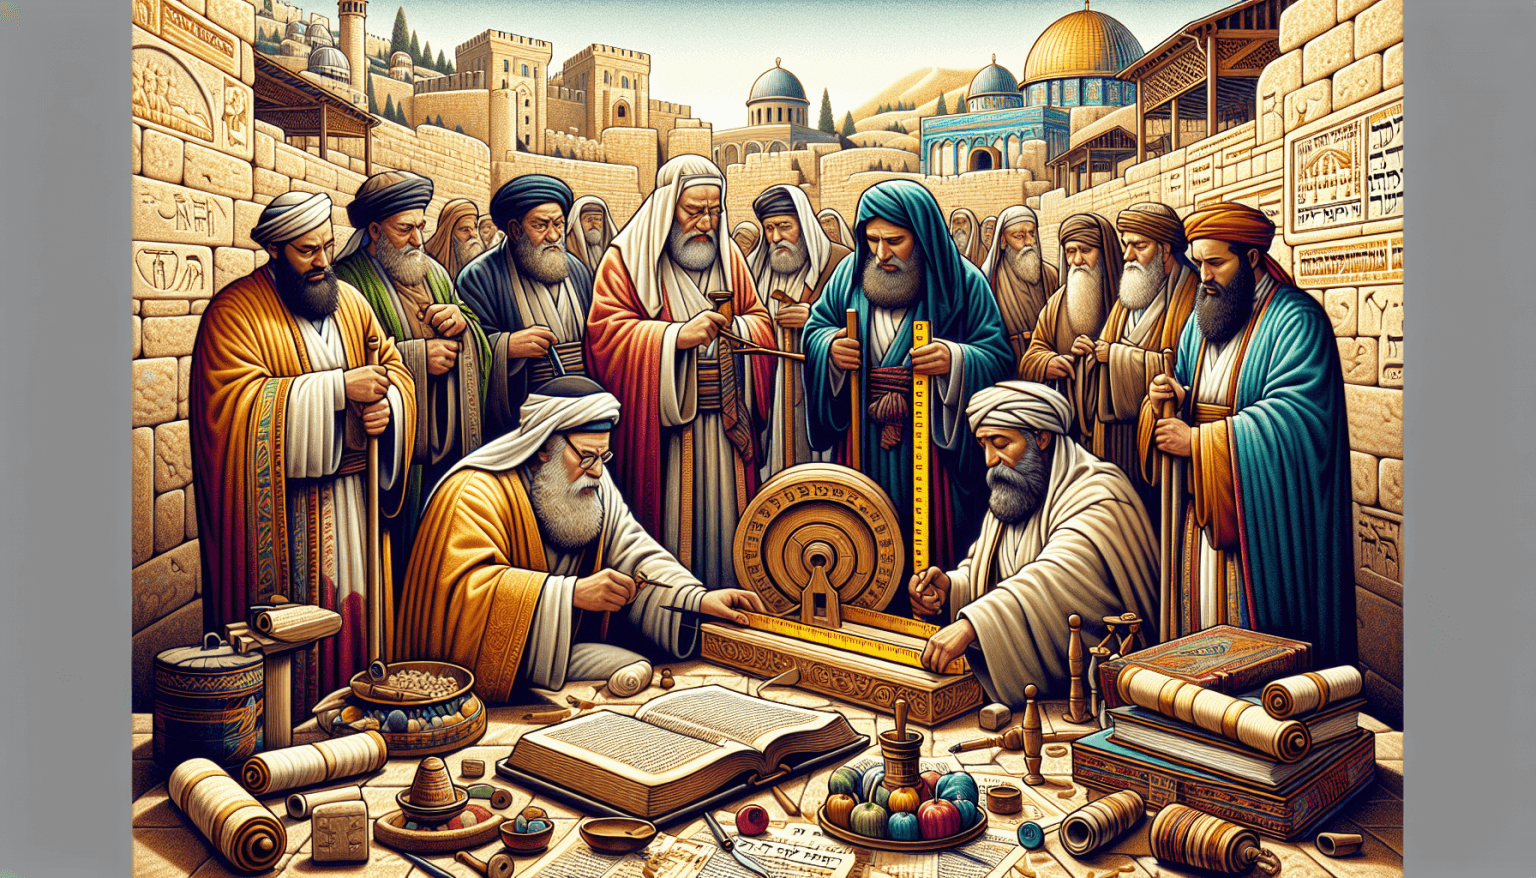 a detailed, historical illustration of ancient Hebrew scholars measuring an object with a cubit, surrounded by biblical scrolls and artifacts, with ancient Jerusalem in the background, in warm earth t